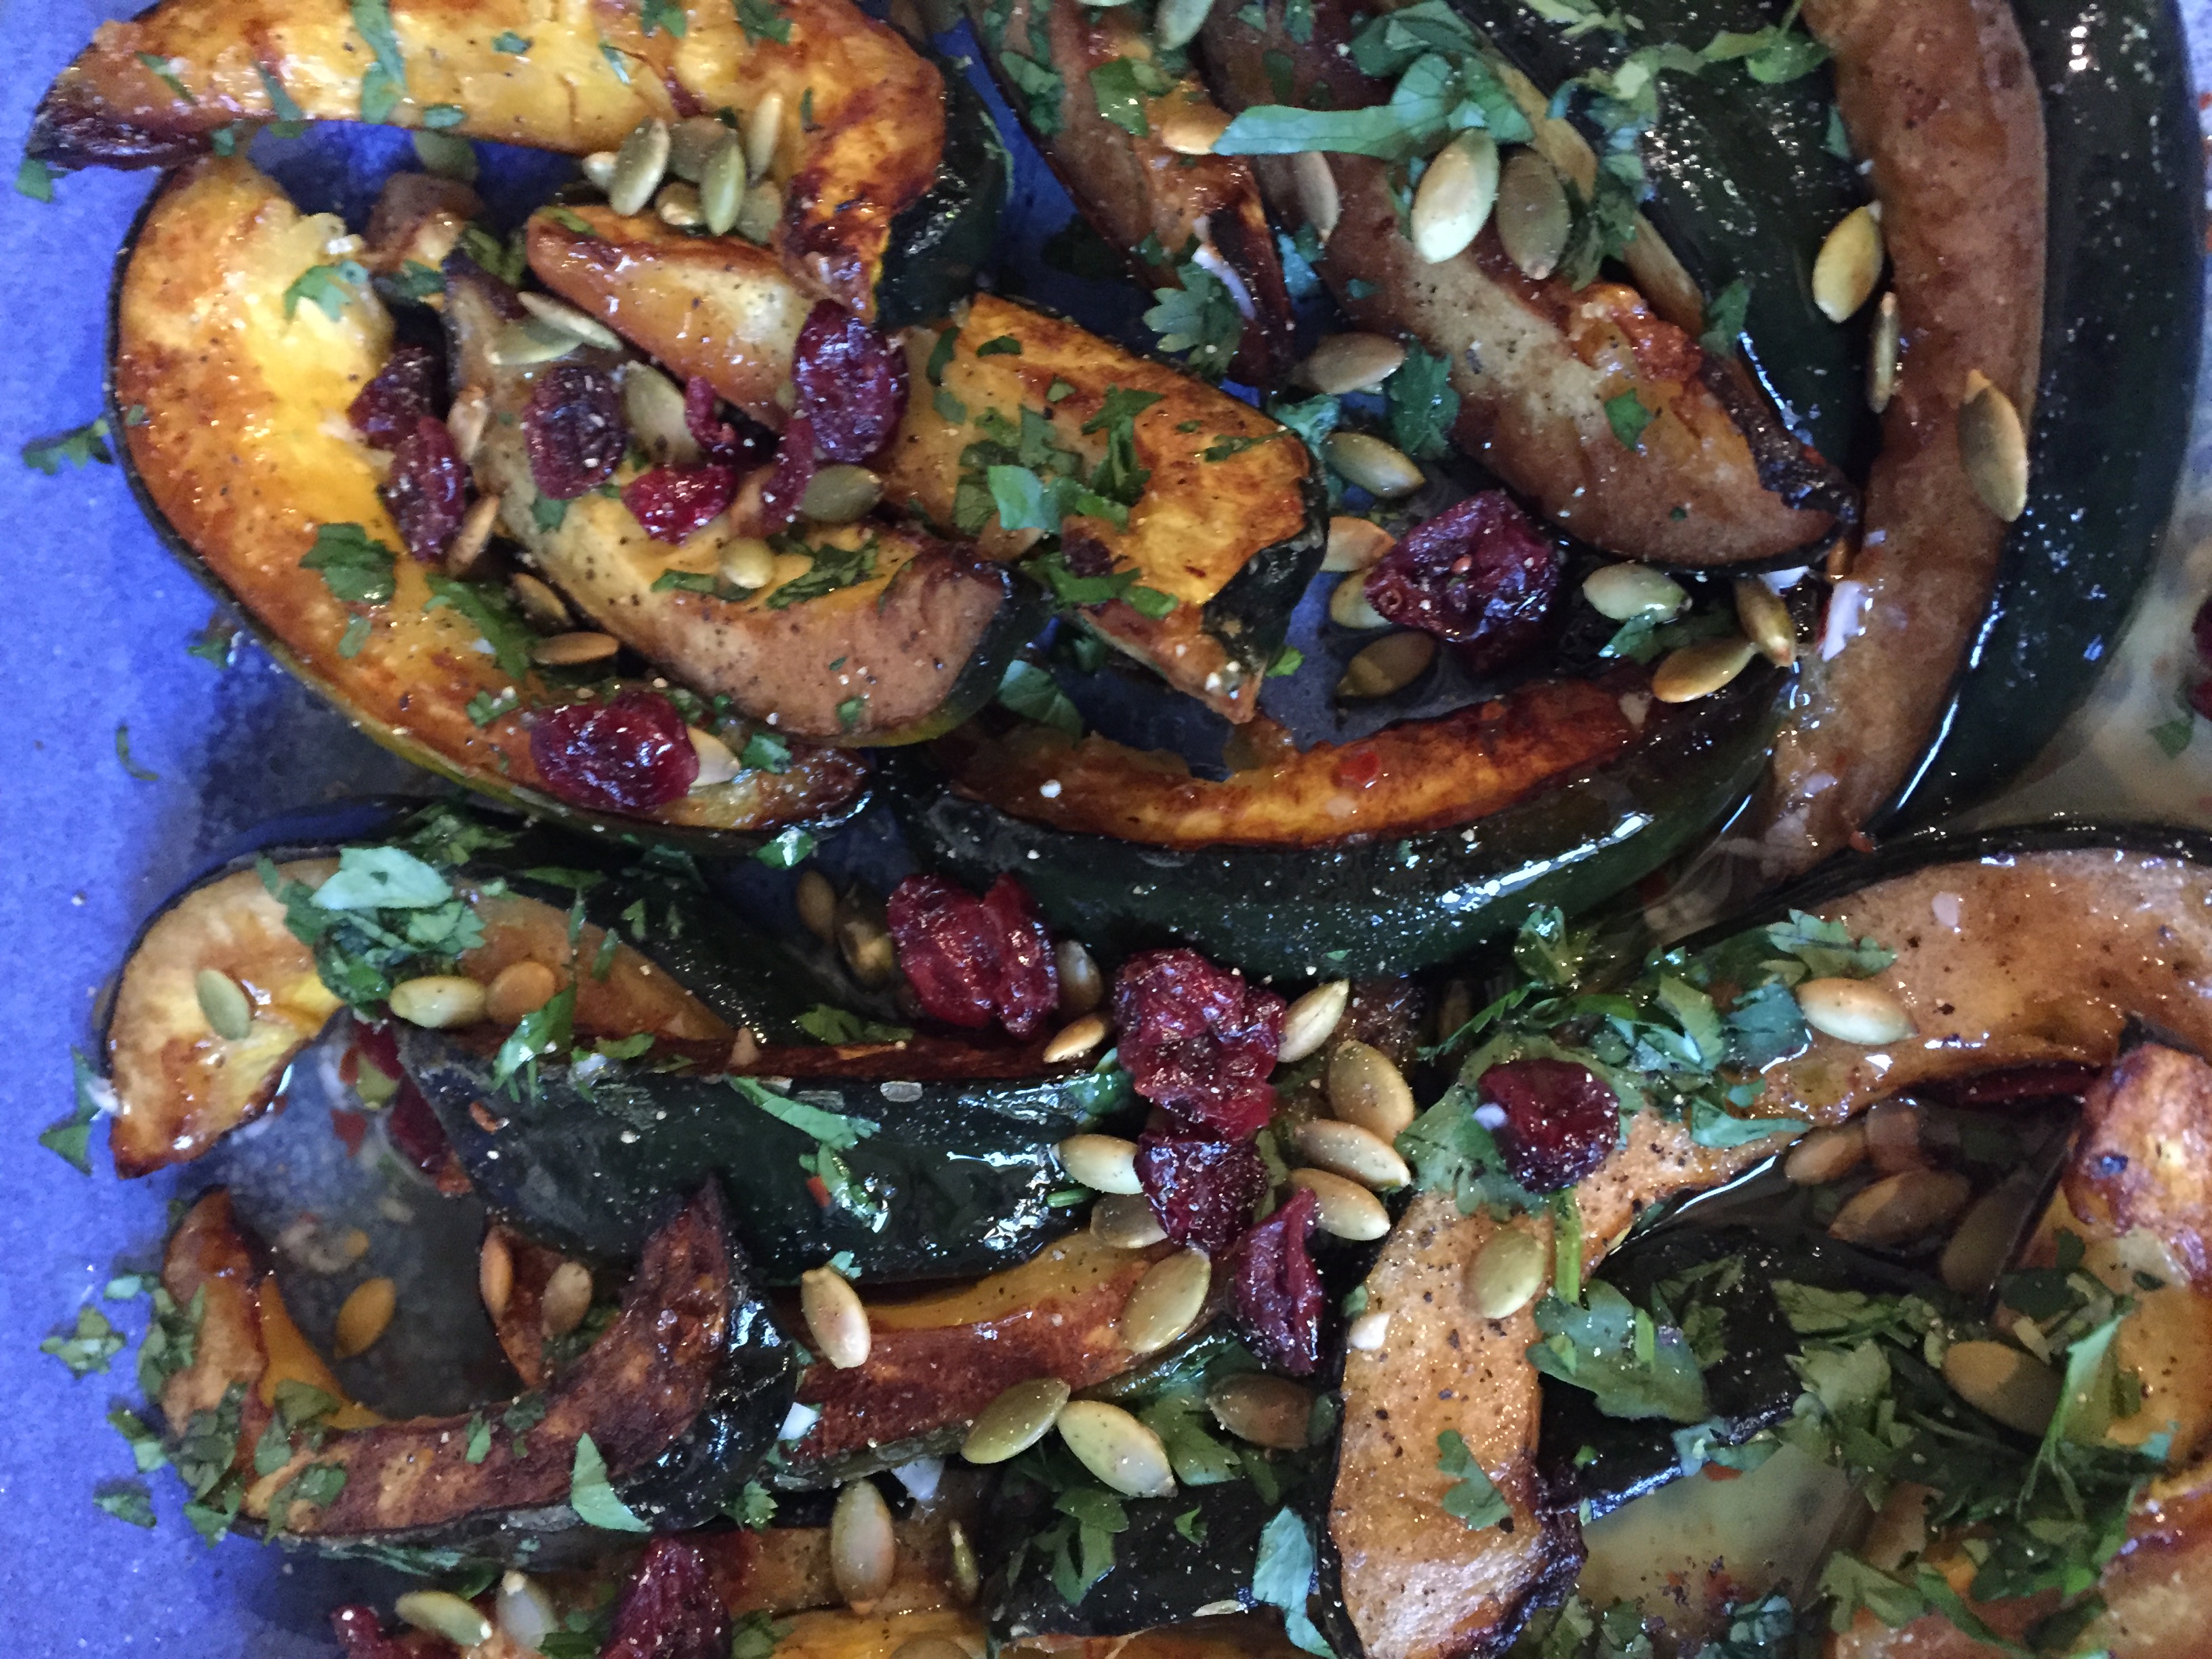 Roasted Chili Lime Acorn Squash with Toasted Pumpkin Seeds and Dried Cranberries